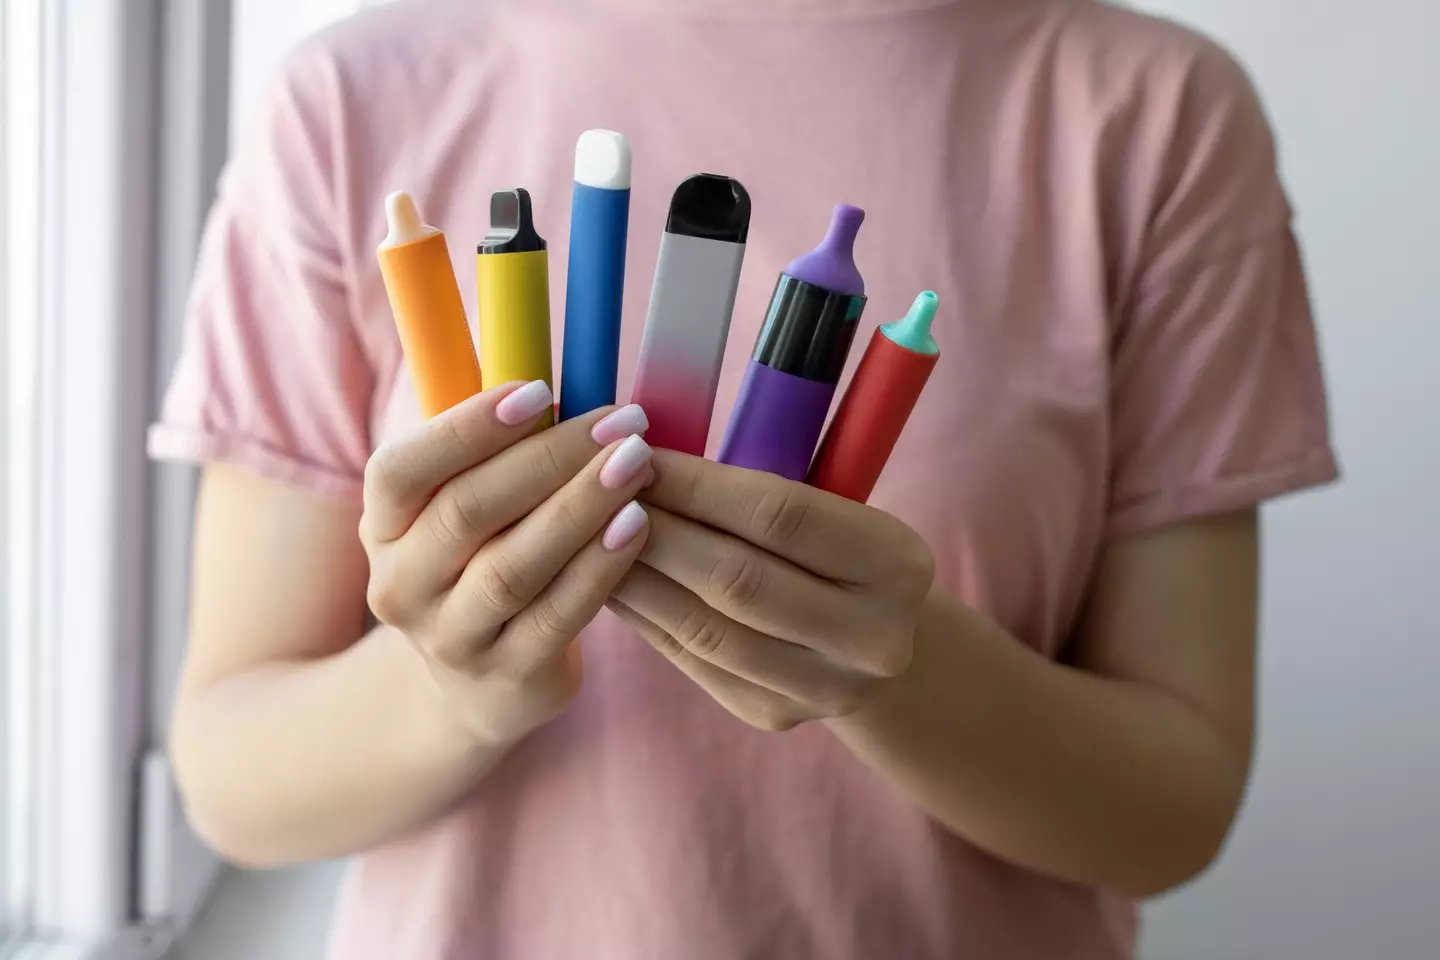 Shocking figures show the number of children using vapes has skyrocketed.